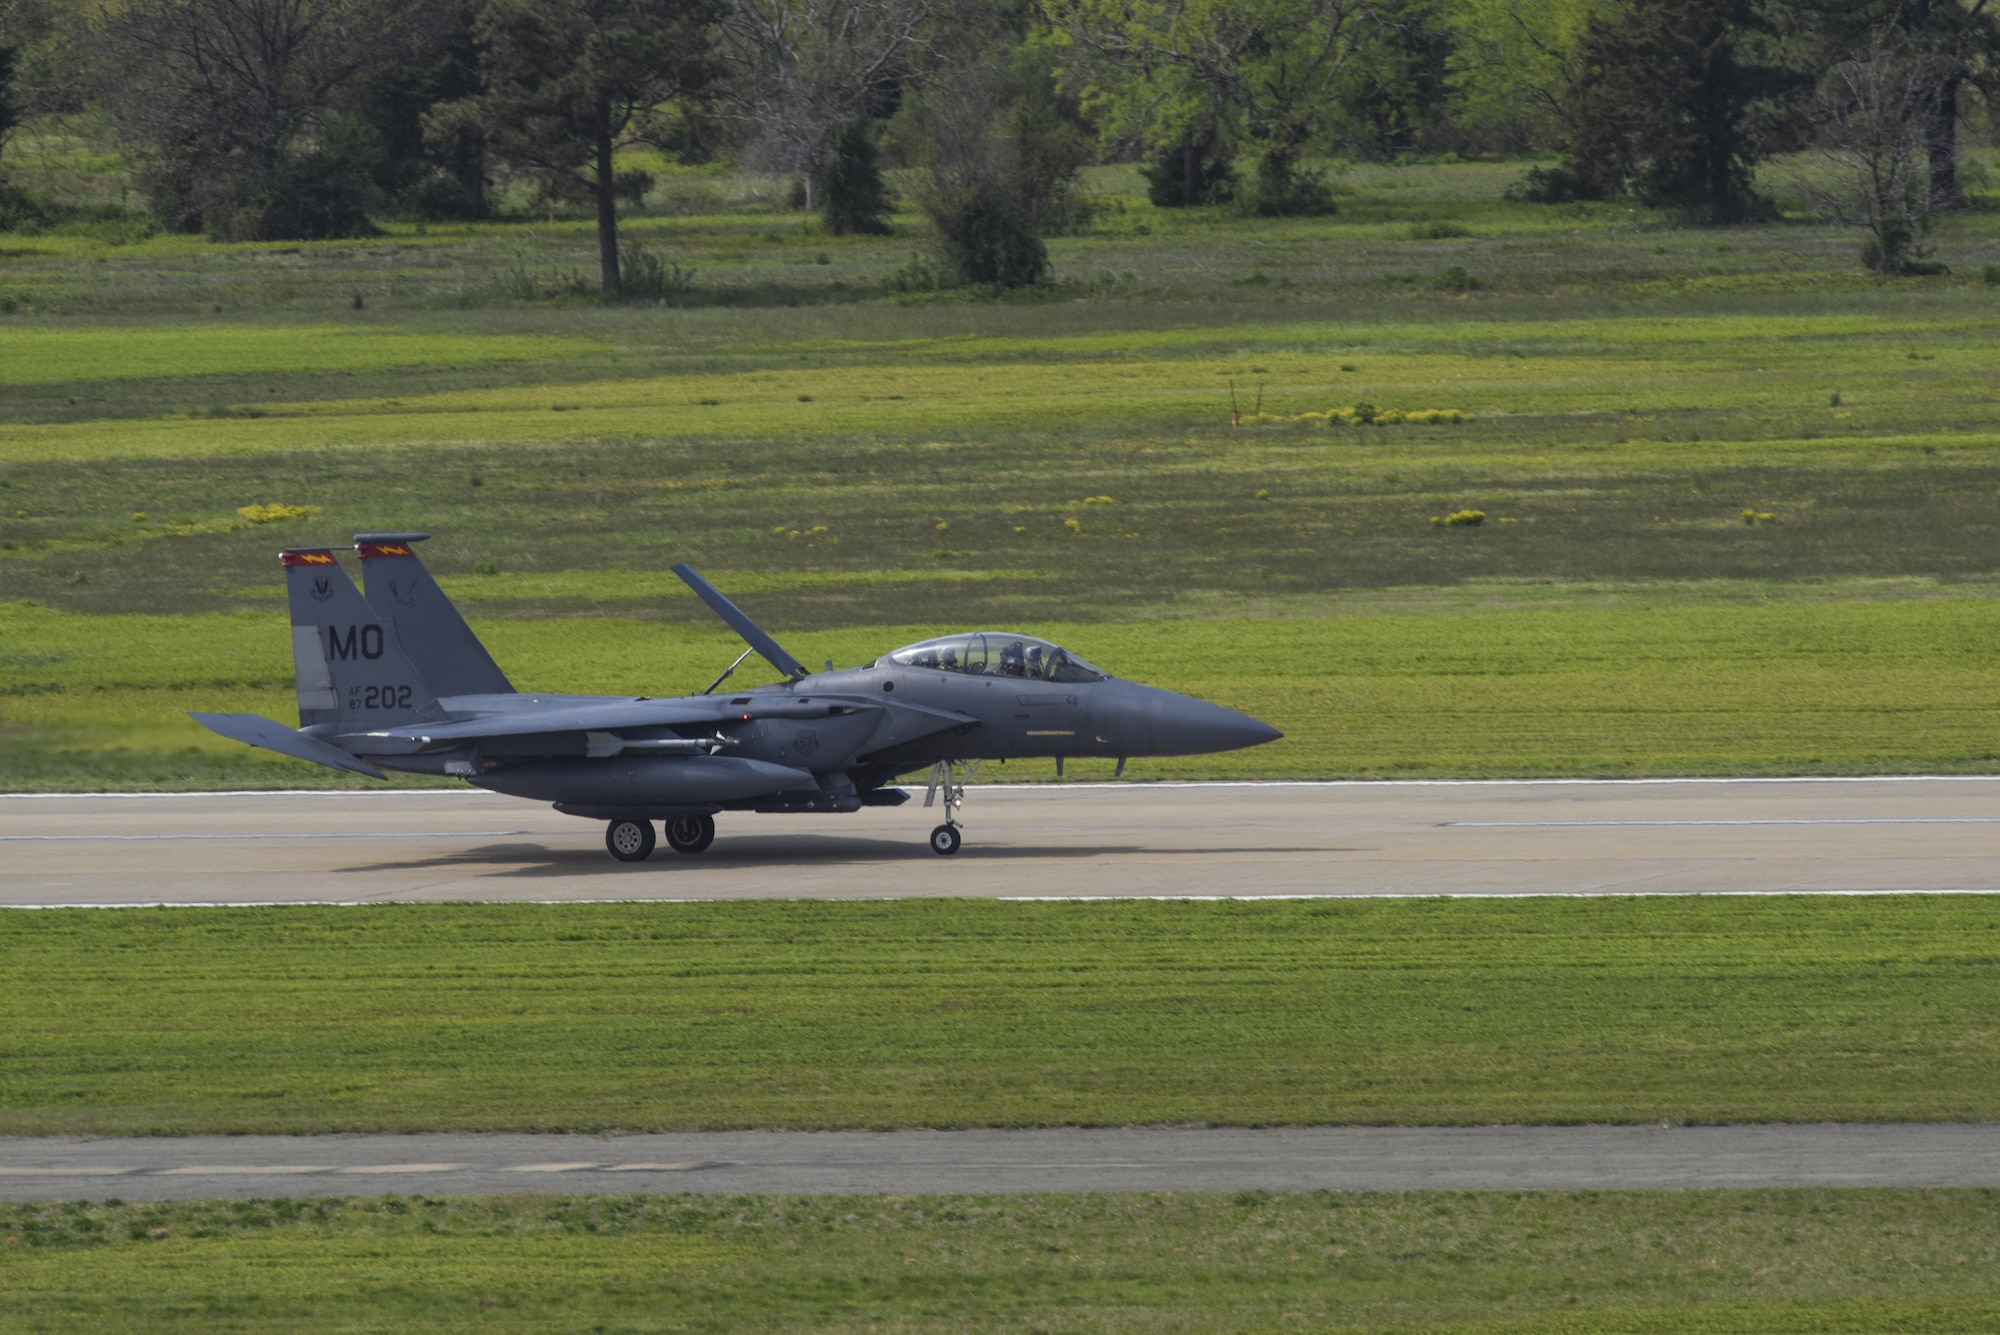 A U.S. Air Force F-15E Strike Eagle assigned to Mountain Home Air Force Base, Idaho, lands on the flightline during ATLANTIC TRIDENT 17 at Joint Base Langley-Eustis, Va., April 14, 2017. The F-15E and T-38 Talon pilots acted as adversaries during combat training missions where they have the upper-hand, creating barriers that limit U.S. and allied efforts. (U.S. Air Force photo/Airman 1st Class Anthony Nin Leclerec)